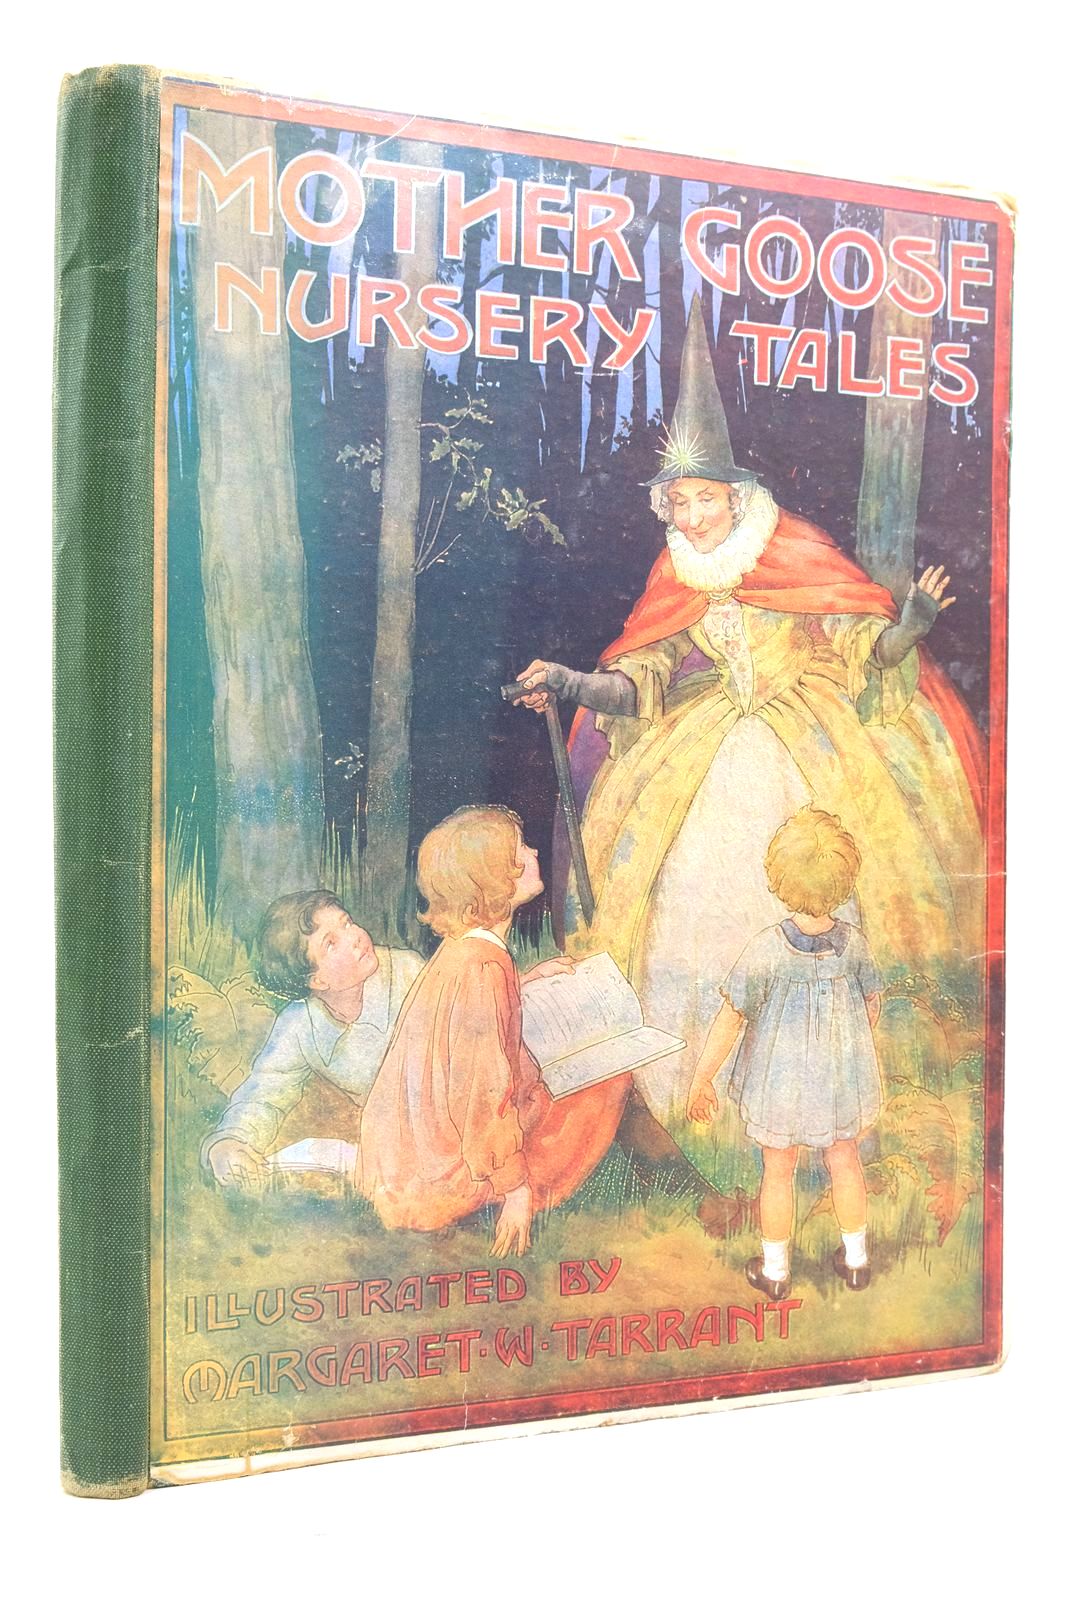 Photo of MOTHER GOOSE NURSERY TALES illustrated by Tarrant, Margaret published by J. Coker & Co. Ltd. (STOCK CODE: 2137937)  for sale by Stella & Rose's Books